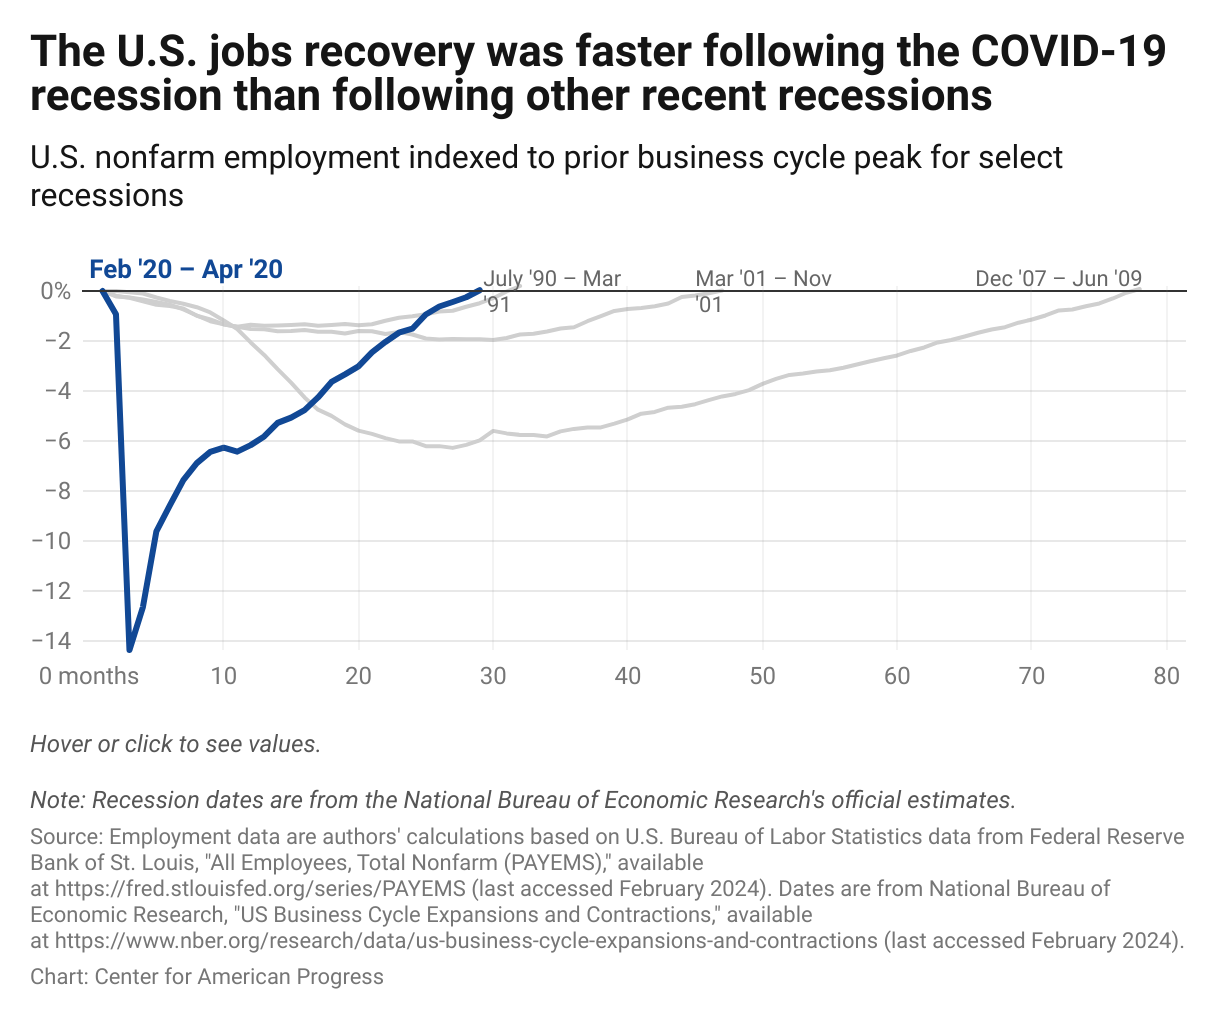 A line graph showing that the jobs recovery following the pandemic recession was faster than the three other most recent recessions.